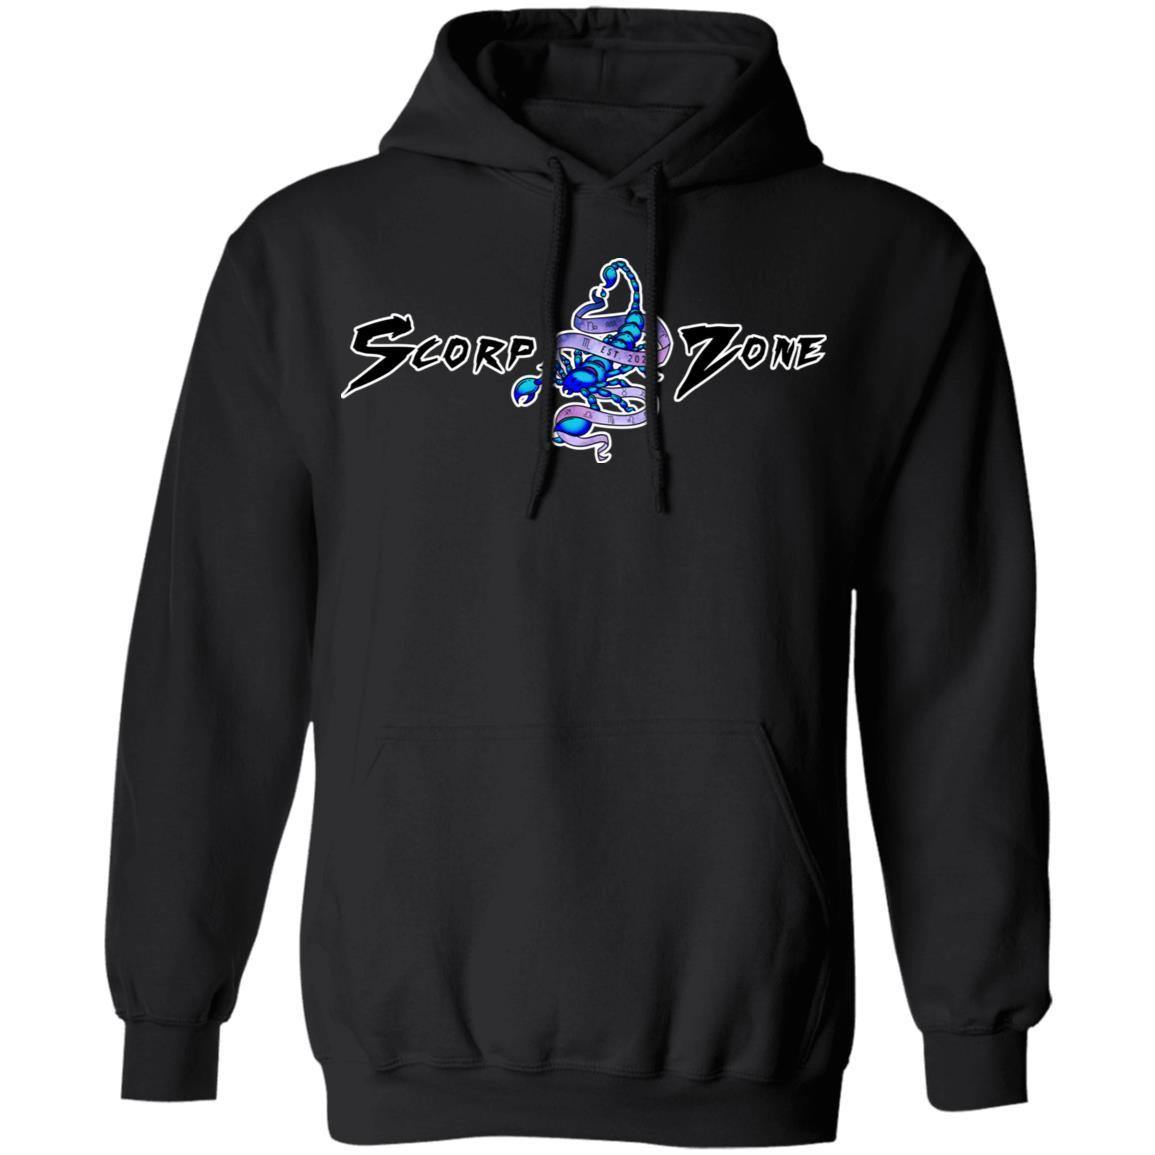 LIBRA DESIGN ON BACK AND SMALL SCORP ZONE LOGO ON FRONT -  Z66 Pullover Hoodie - ScorpZone